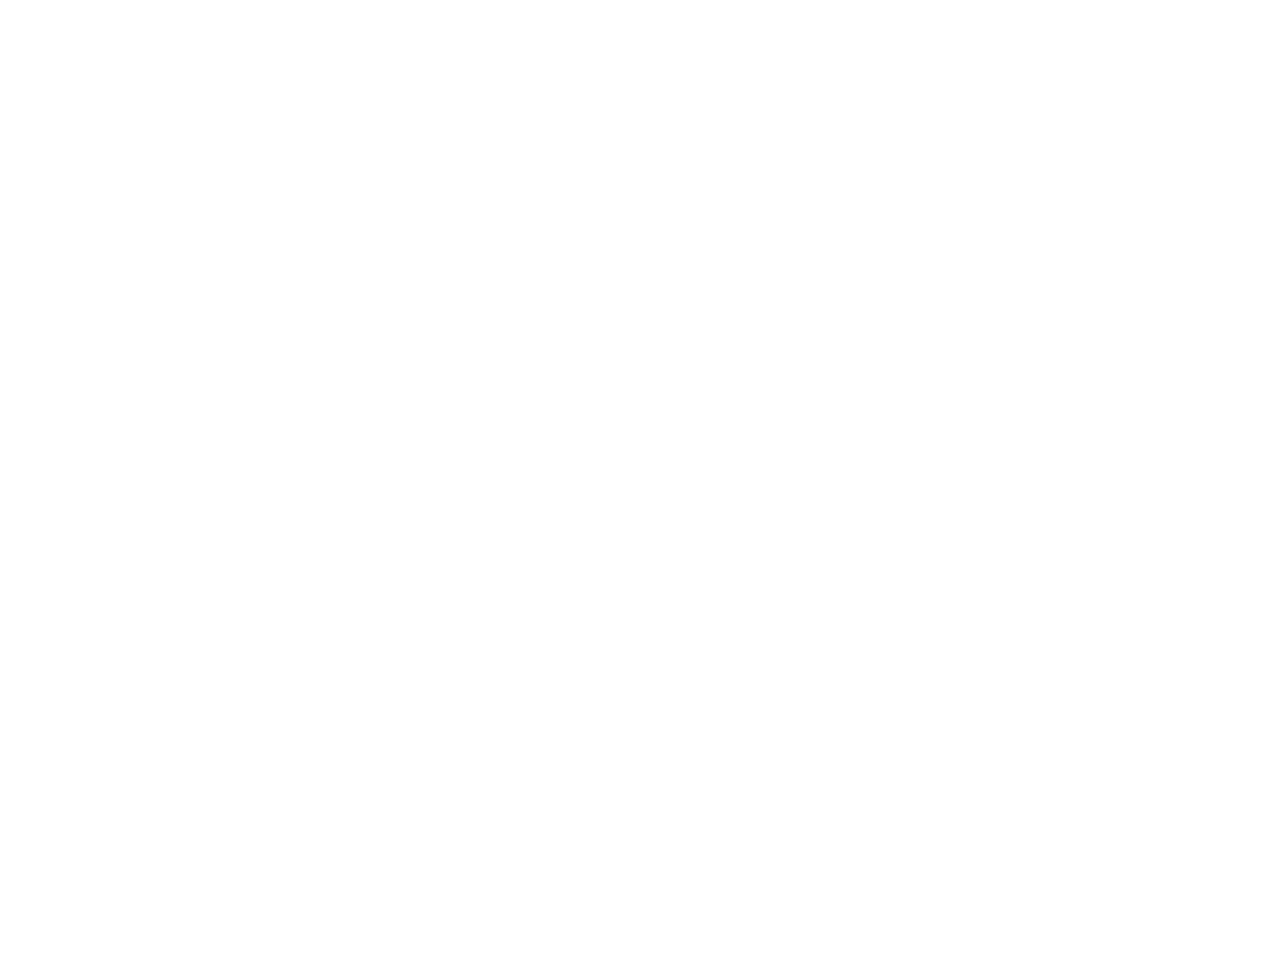 Ferris contracting llc's web page